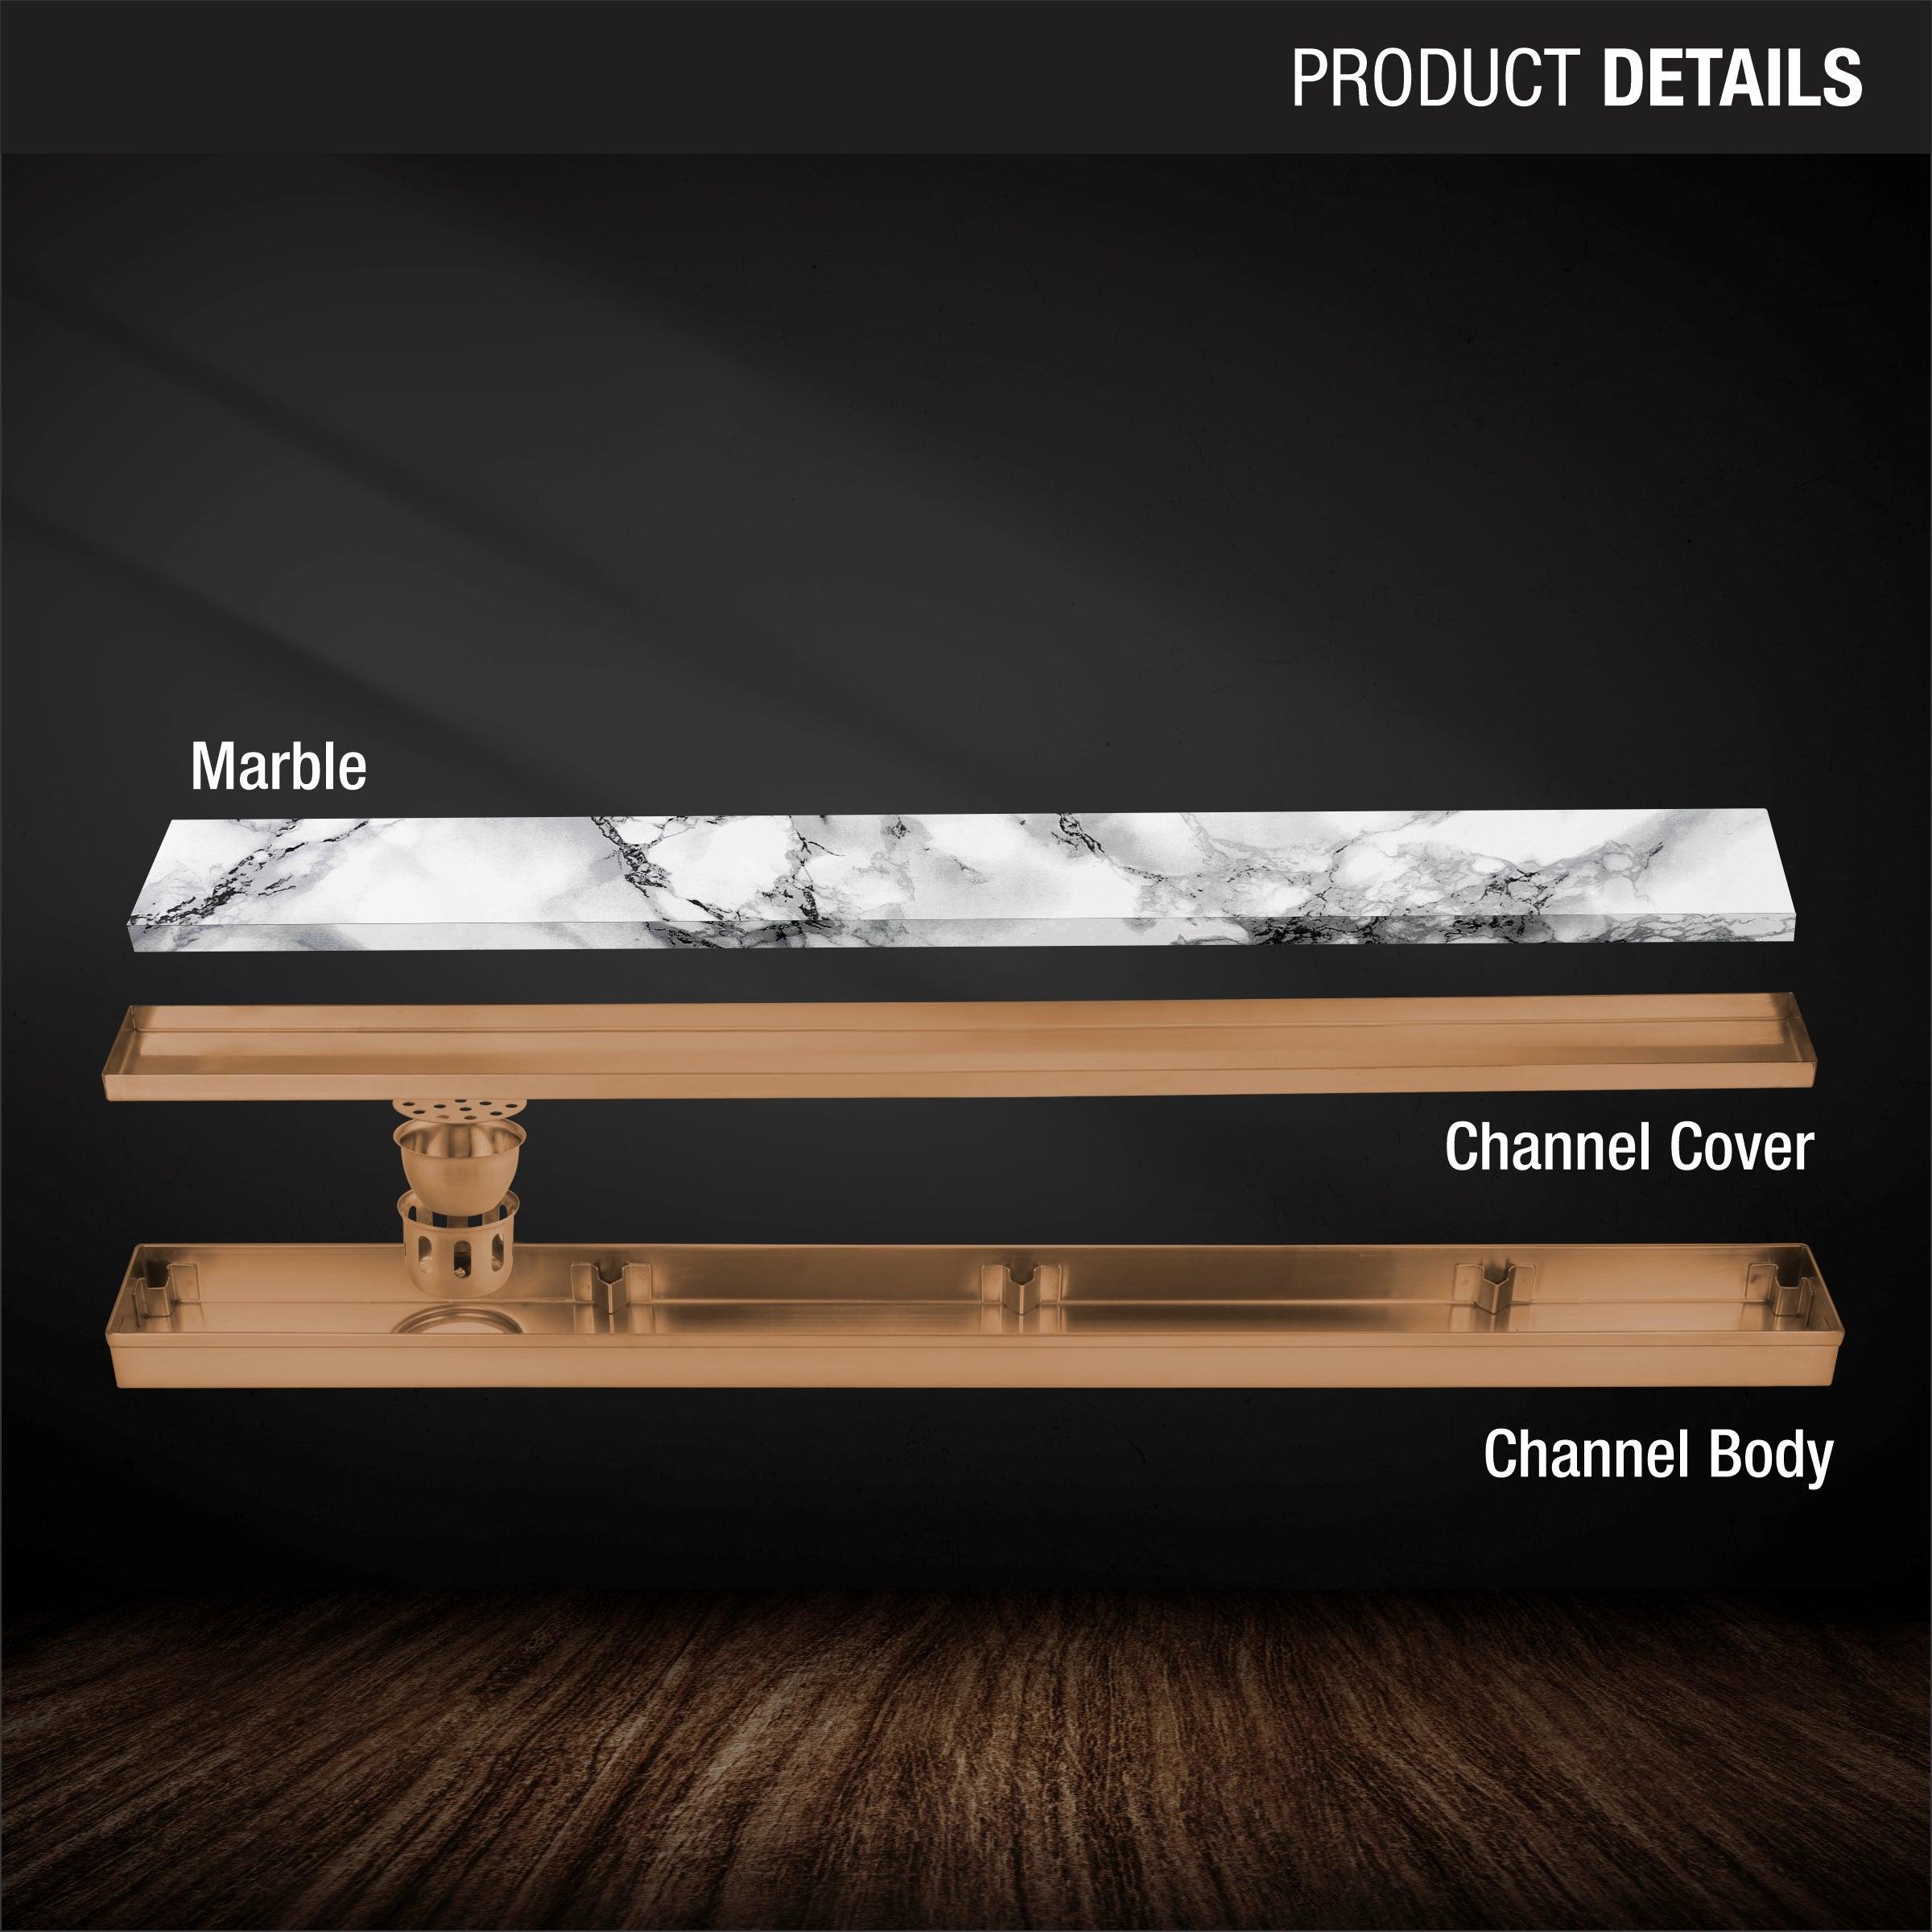 Marble Insert Shower Drain Channel - Antique Copper (40 x 3 Inches) product details